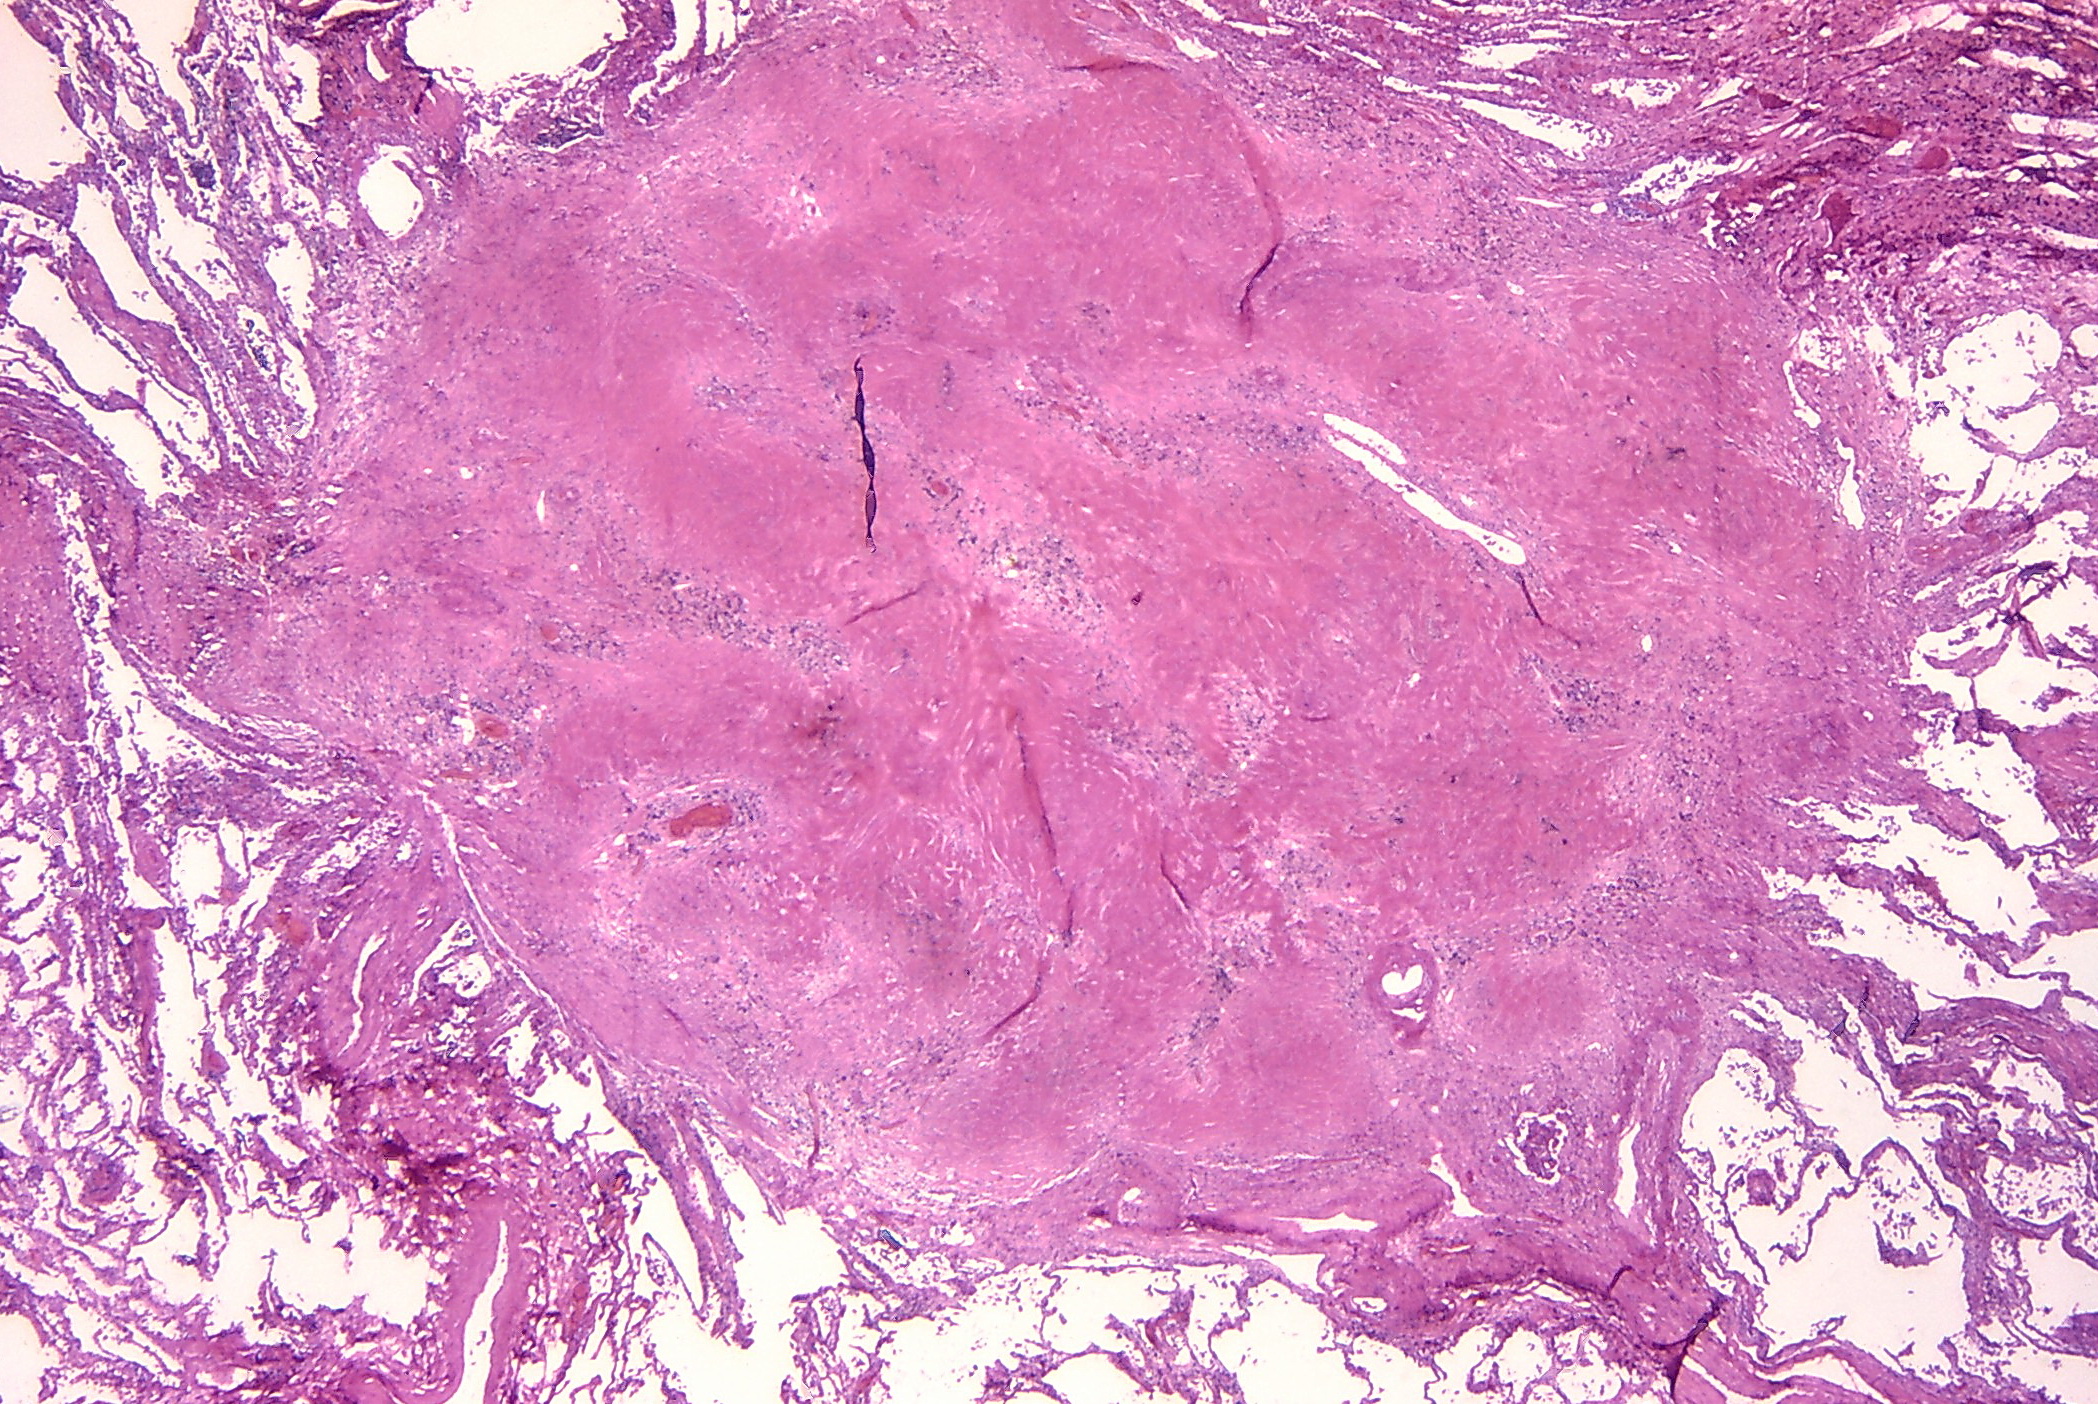 histological slide of lung tissue containing a solid-looking mass of tissue that is surrounded by normal lung tissue.